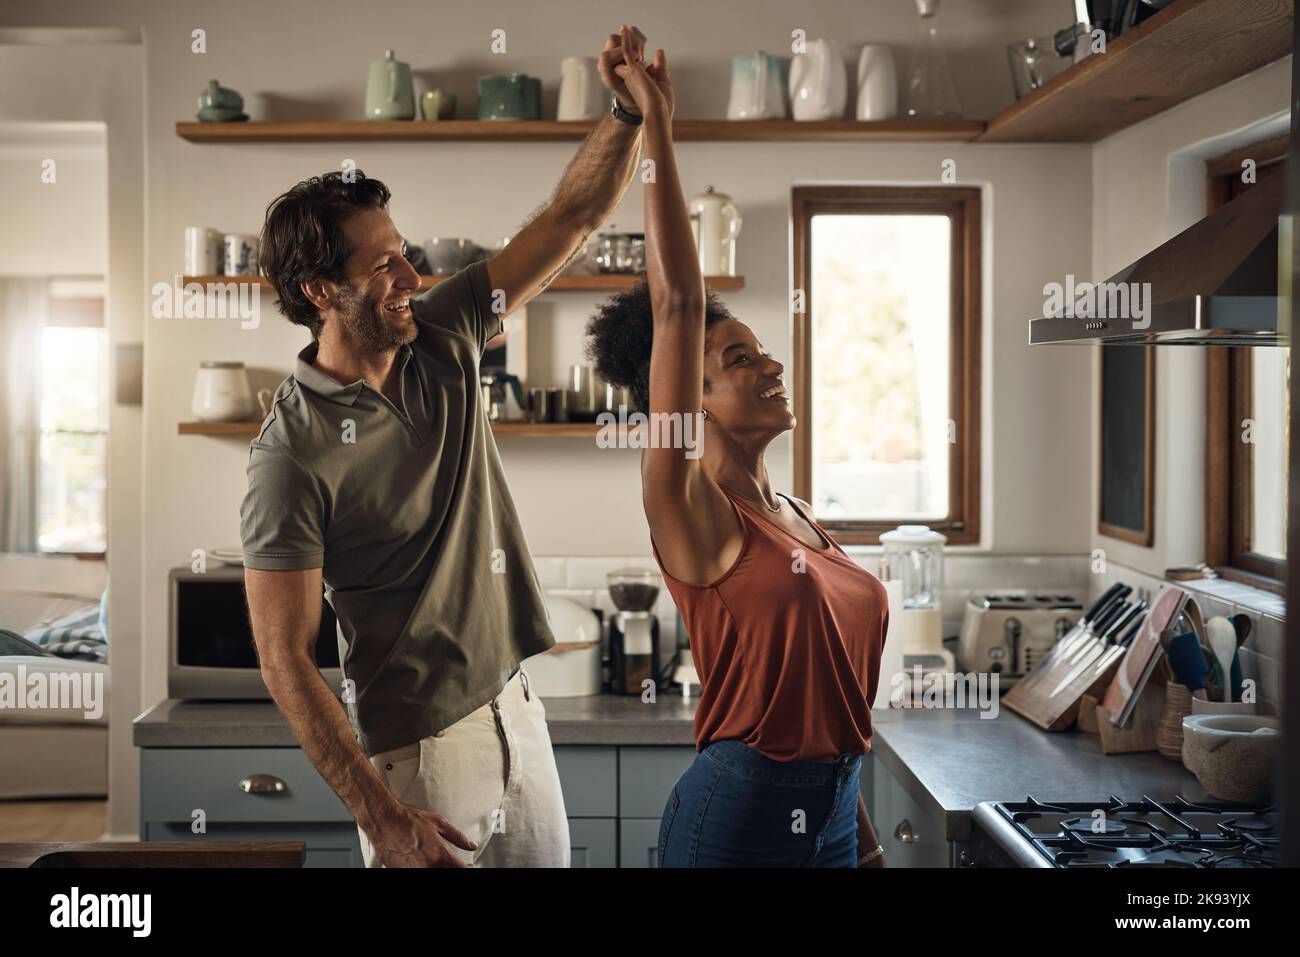 He loves dancing with his queen. an affectionate young couple dancing together in their kitchen at home. Stock Photo